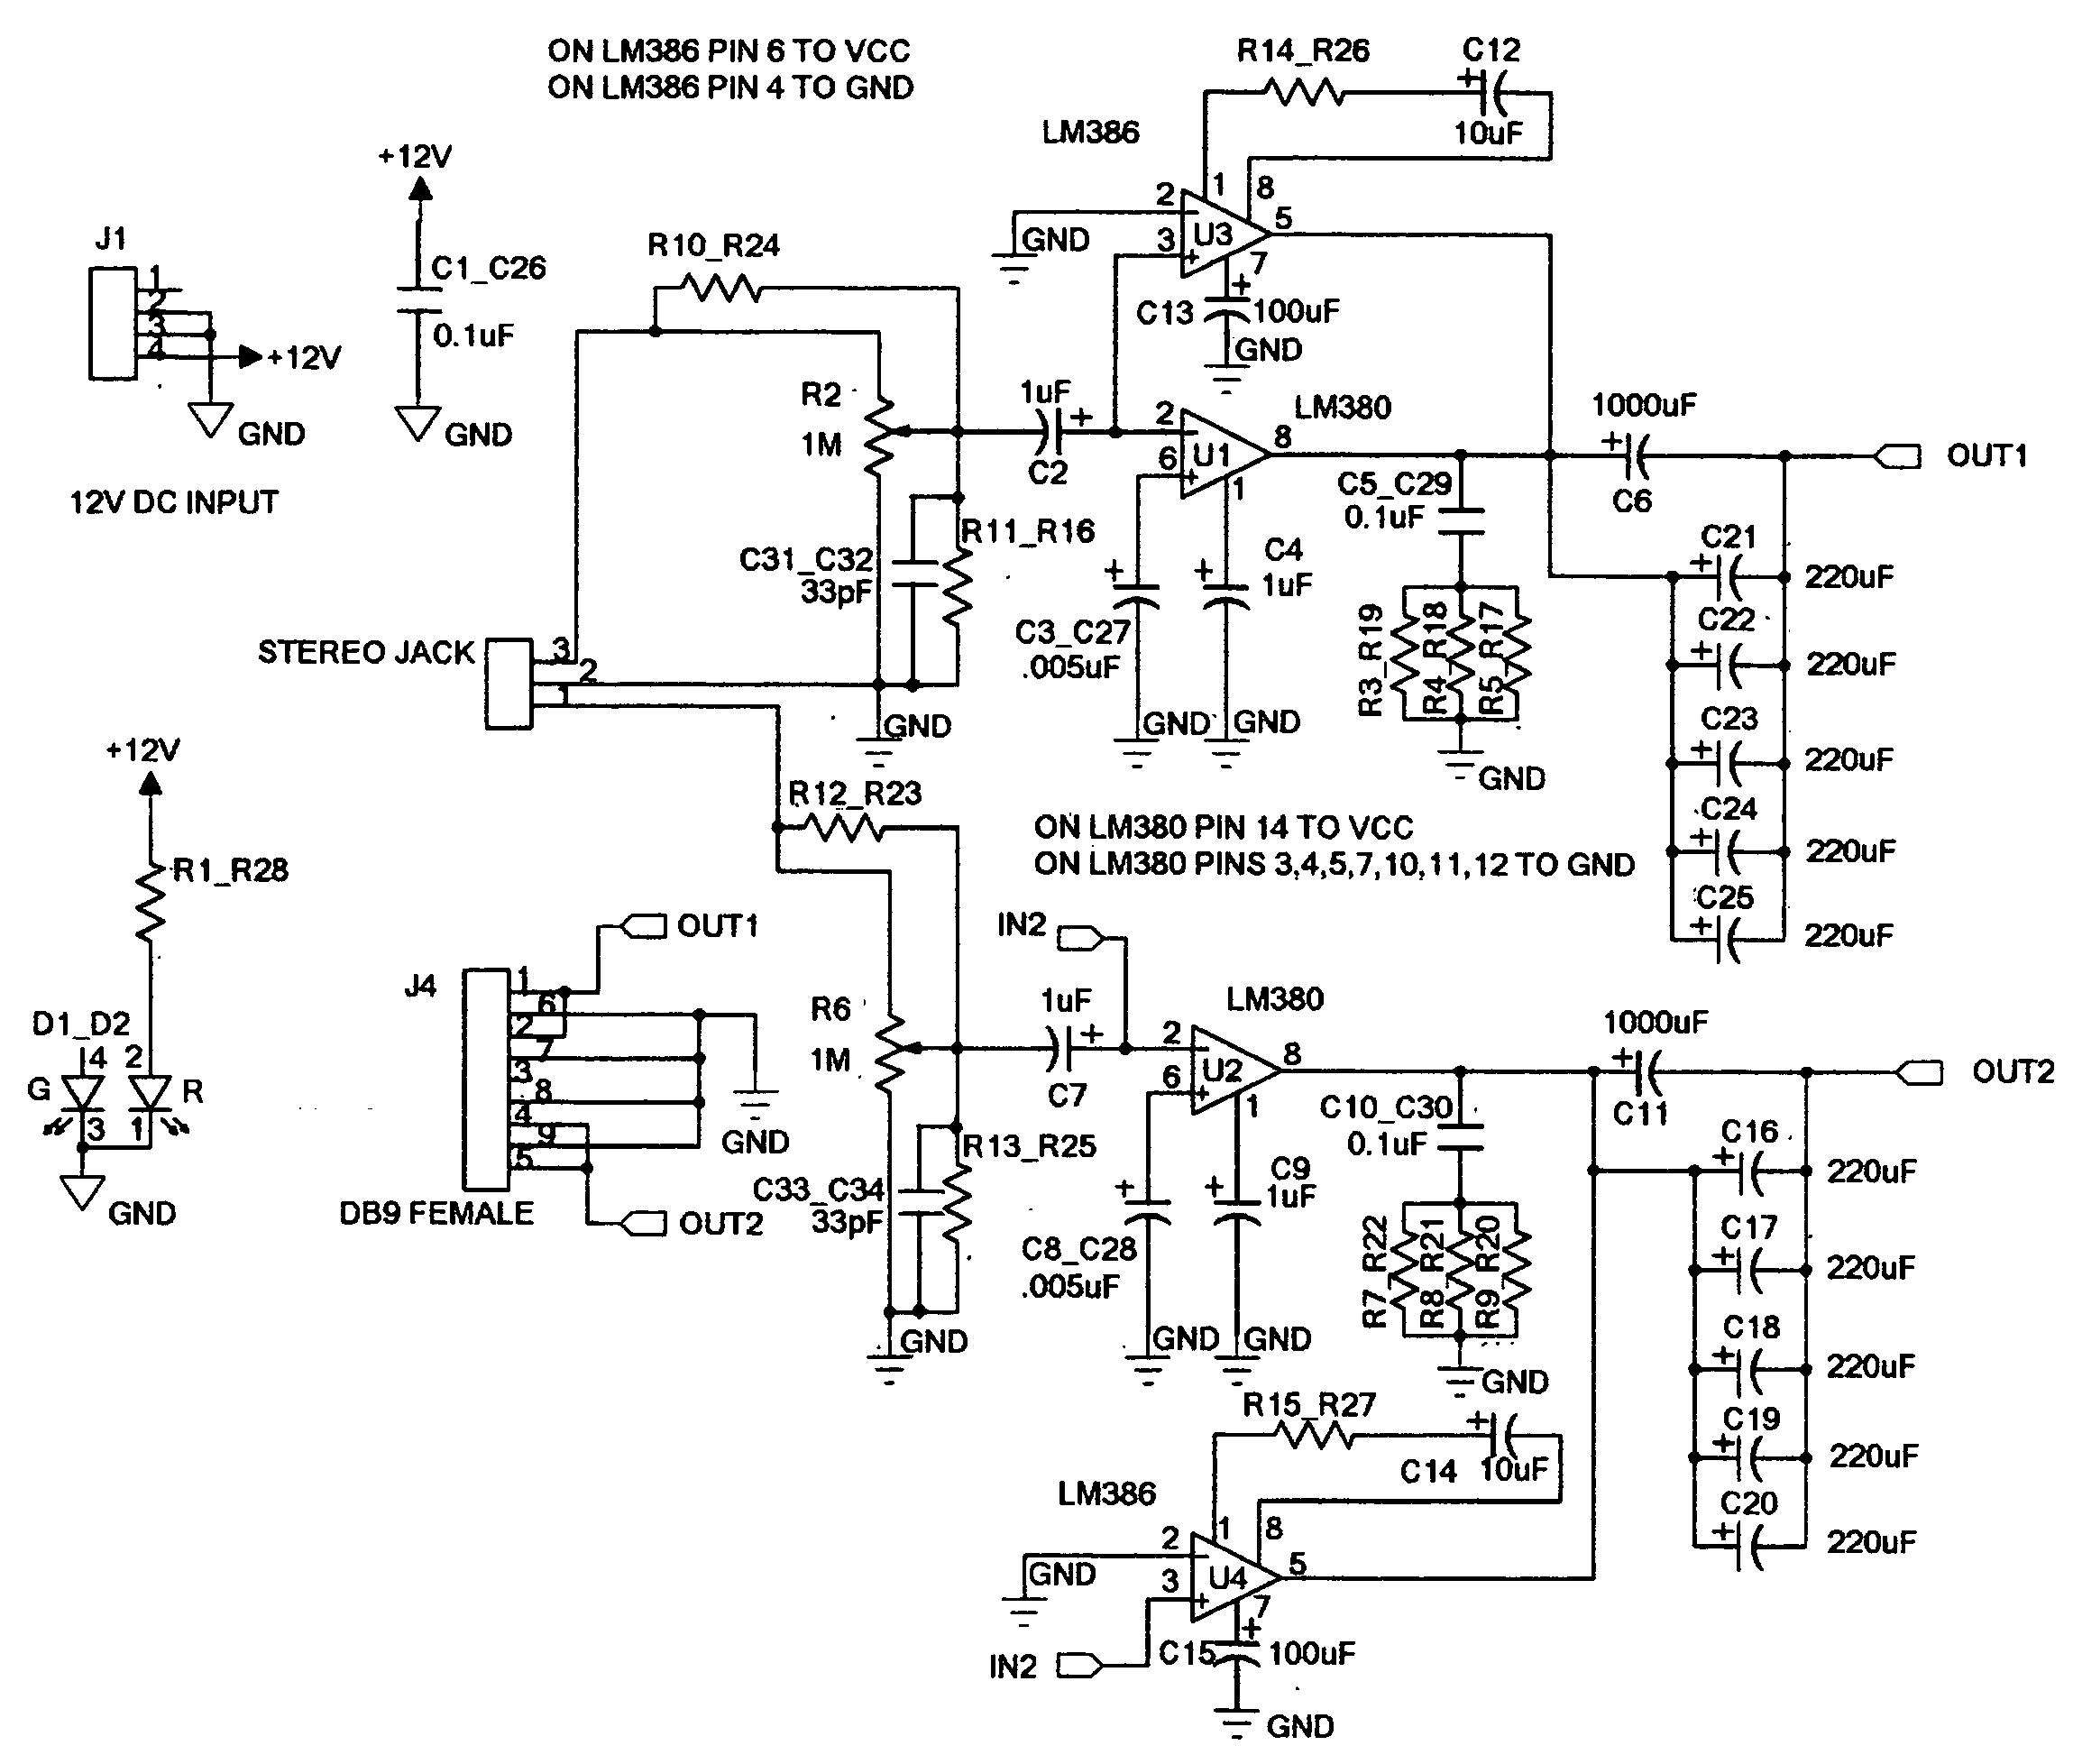 Computer installed stereo PA amplifier card